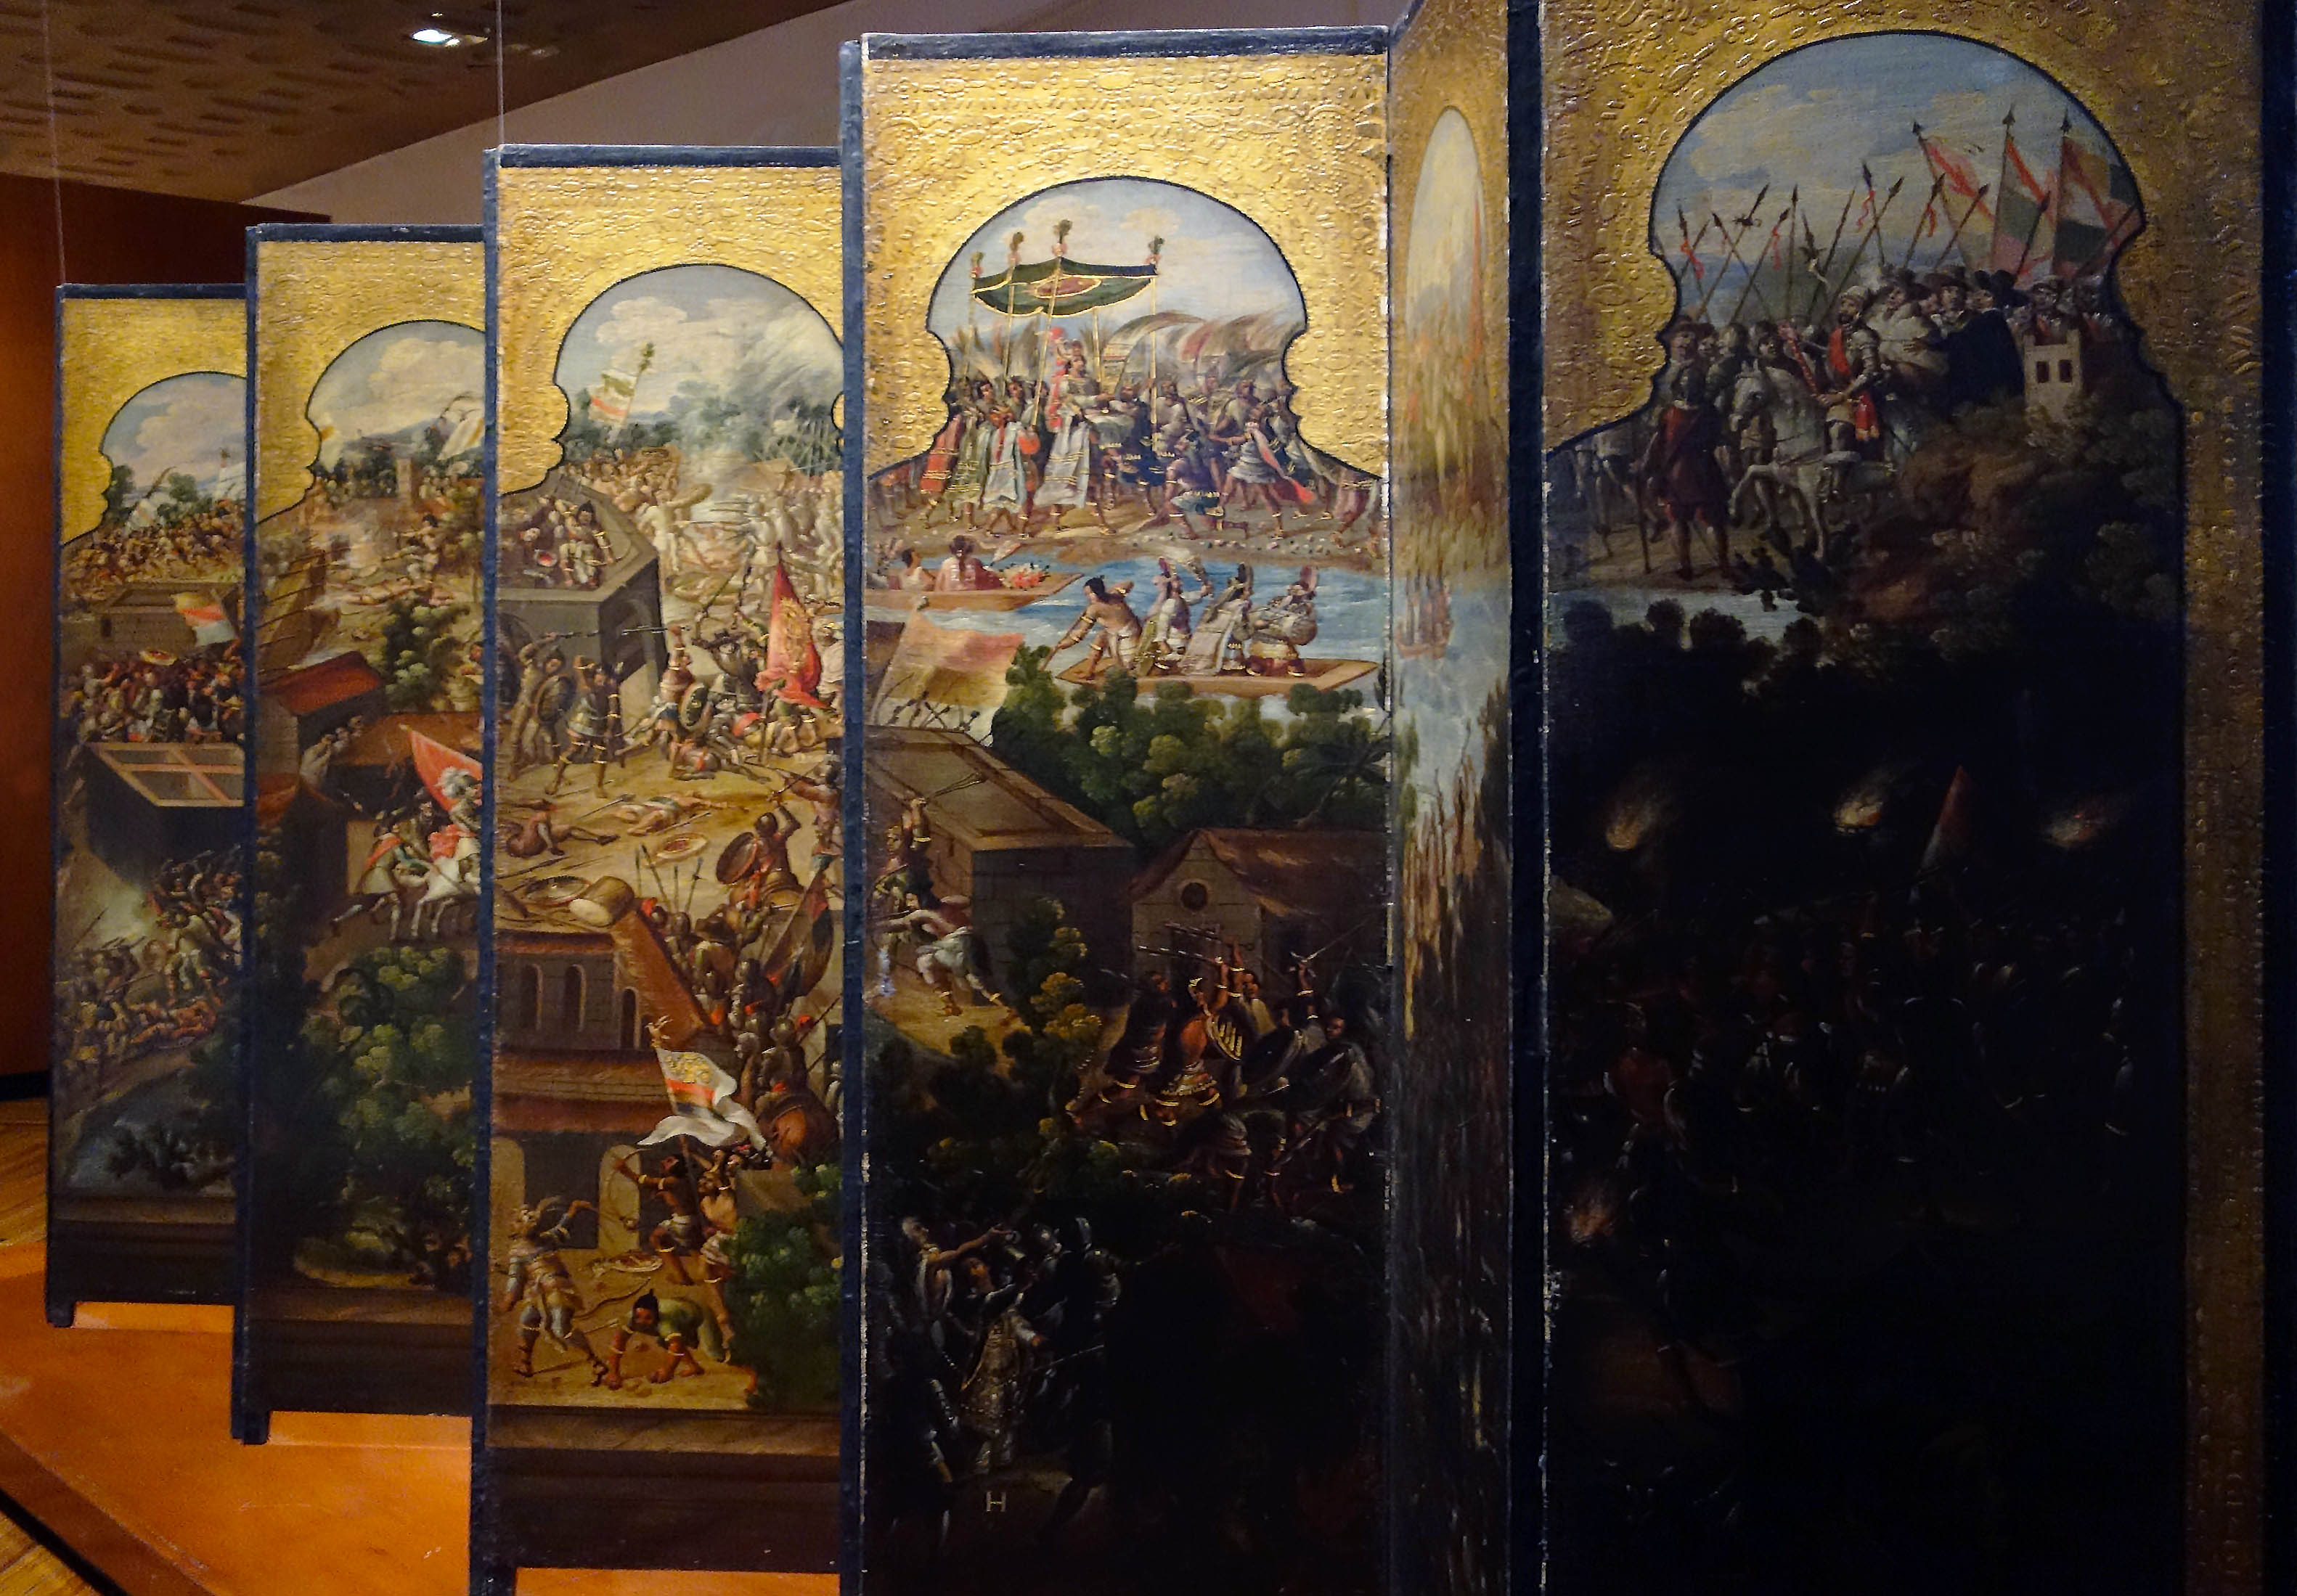 Biombo with the Conquest of Mexico and View of Mexico City, New Spain, late 17th century (Museo Franz Mayer, Mexico City)